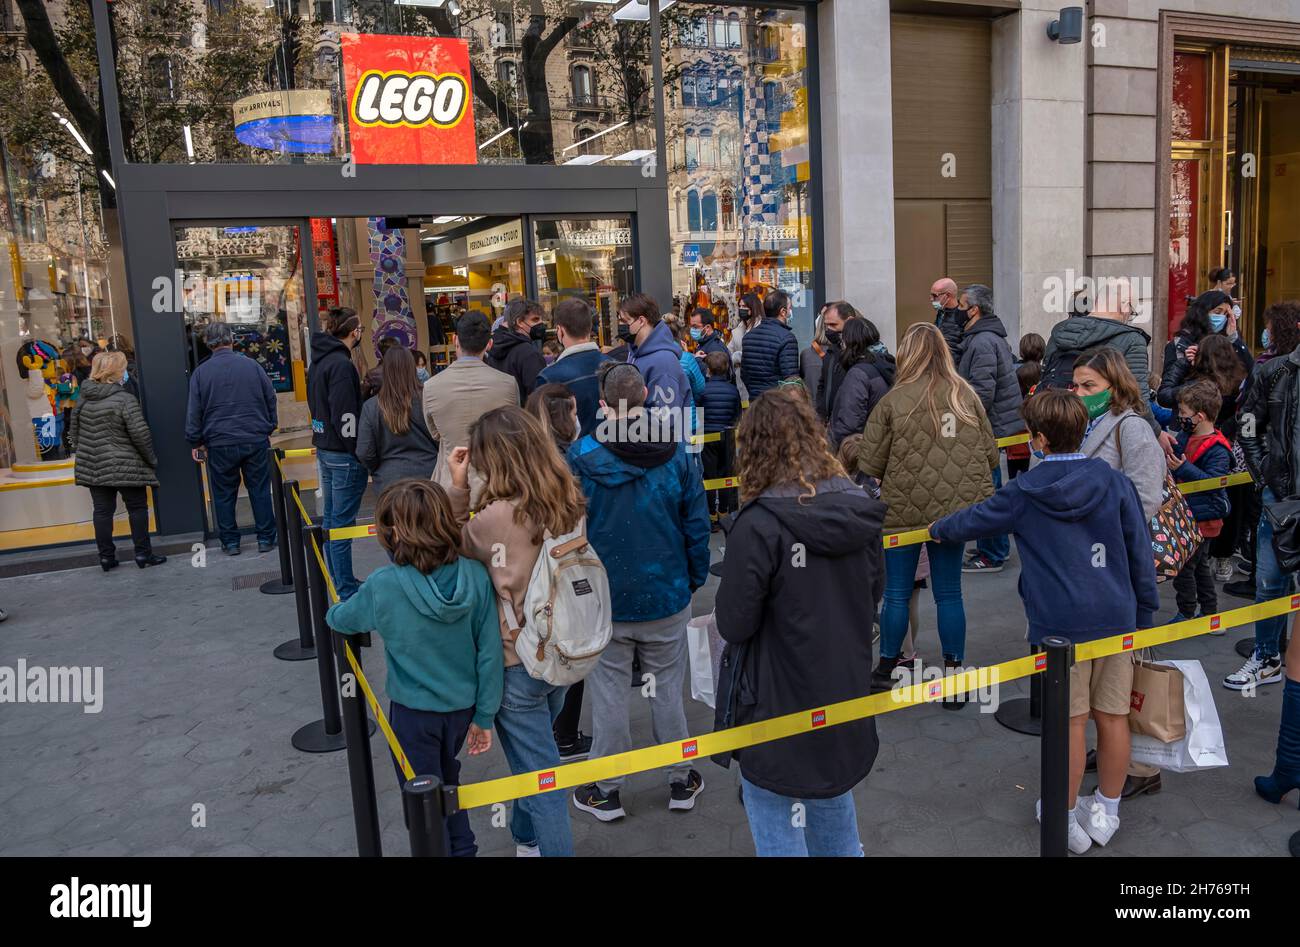 Barcelona, Spain. 20th Nov, 2021. People crowded at the new store.The  Danish construction toy company LEGO has opened a new store on Passeig de  Gràcia in Barcelona inspired by the work of